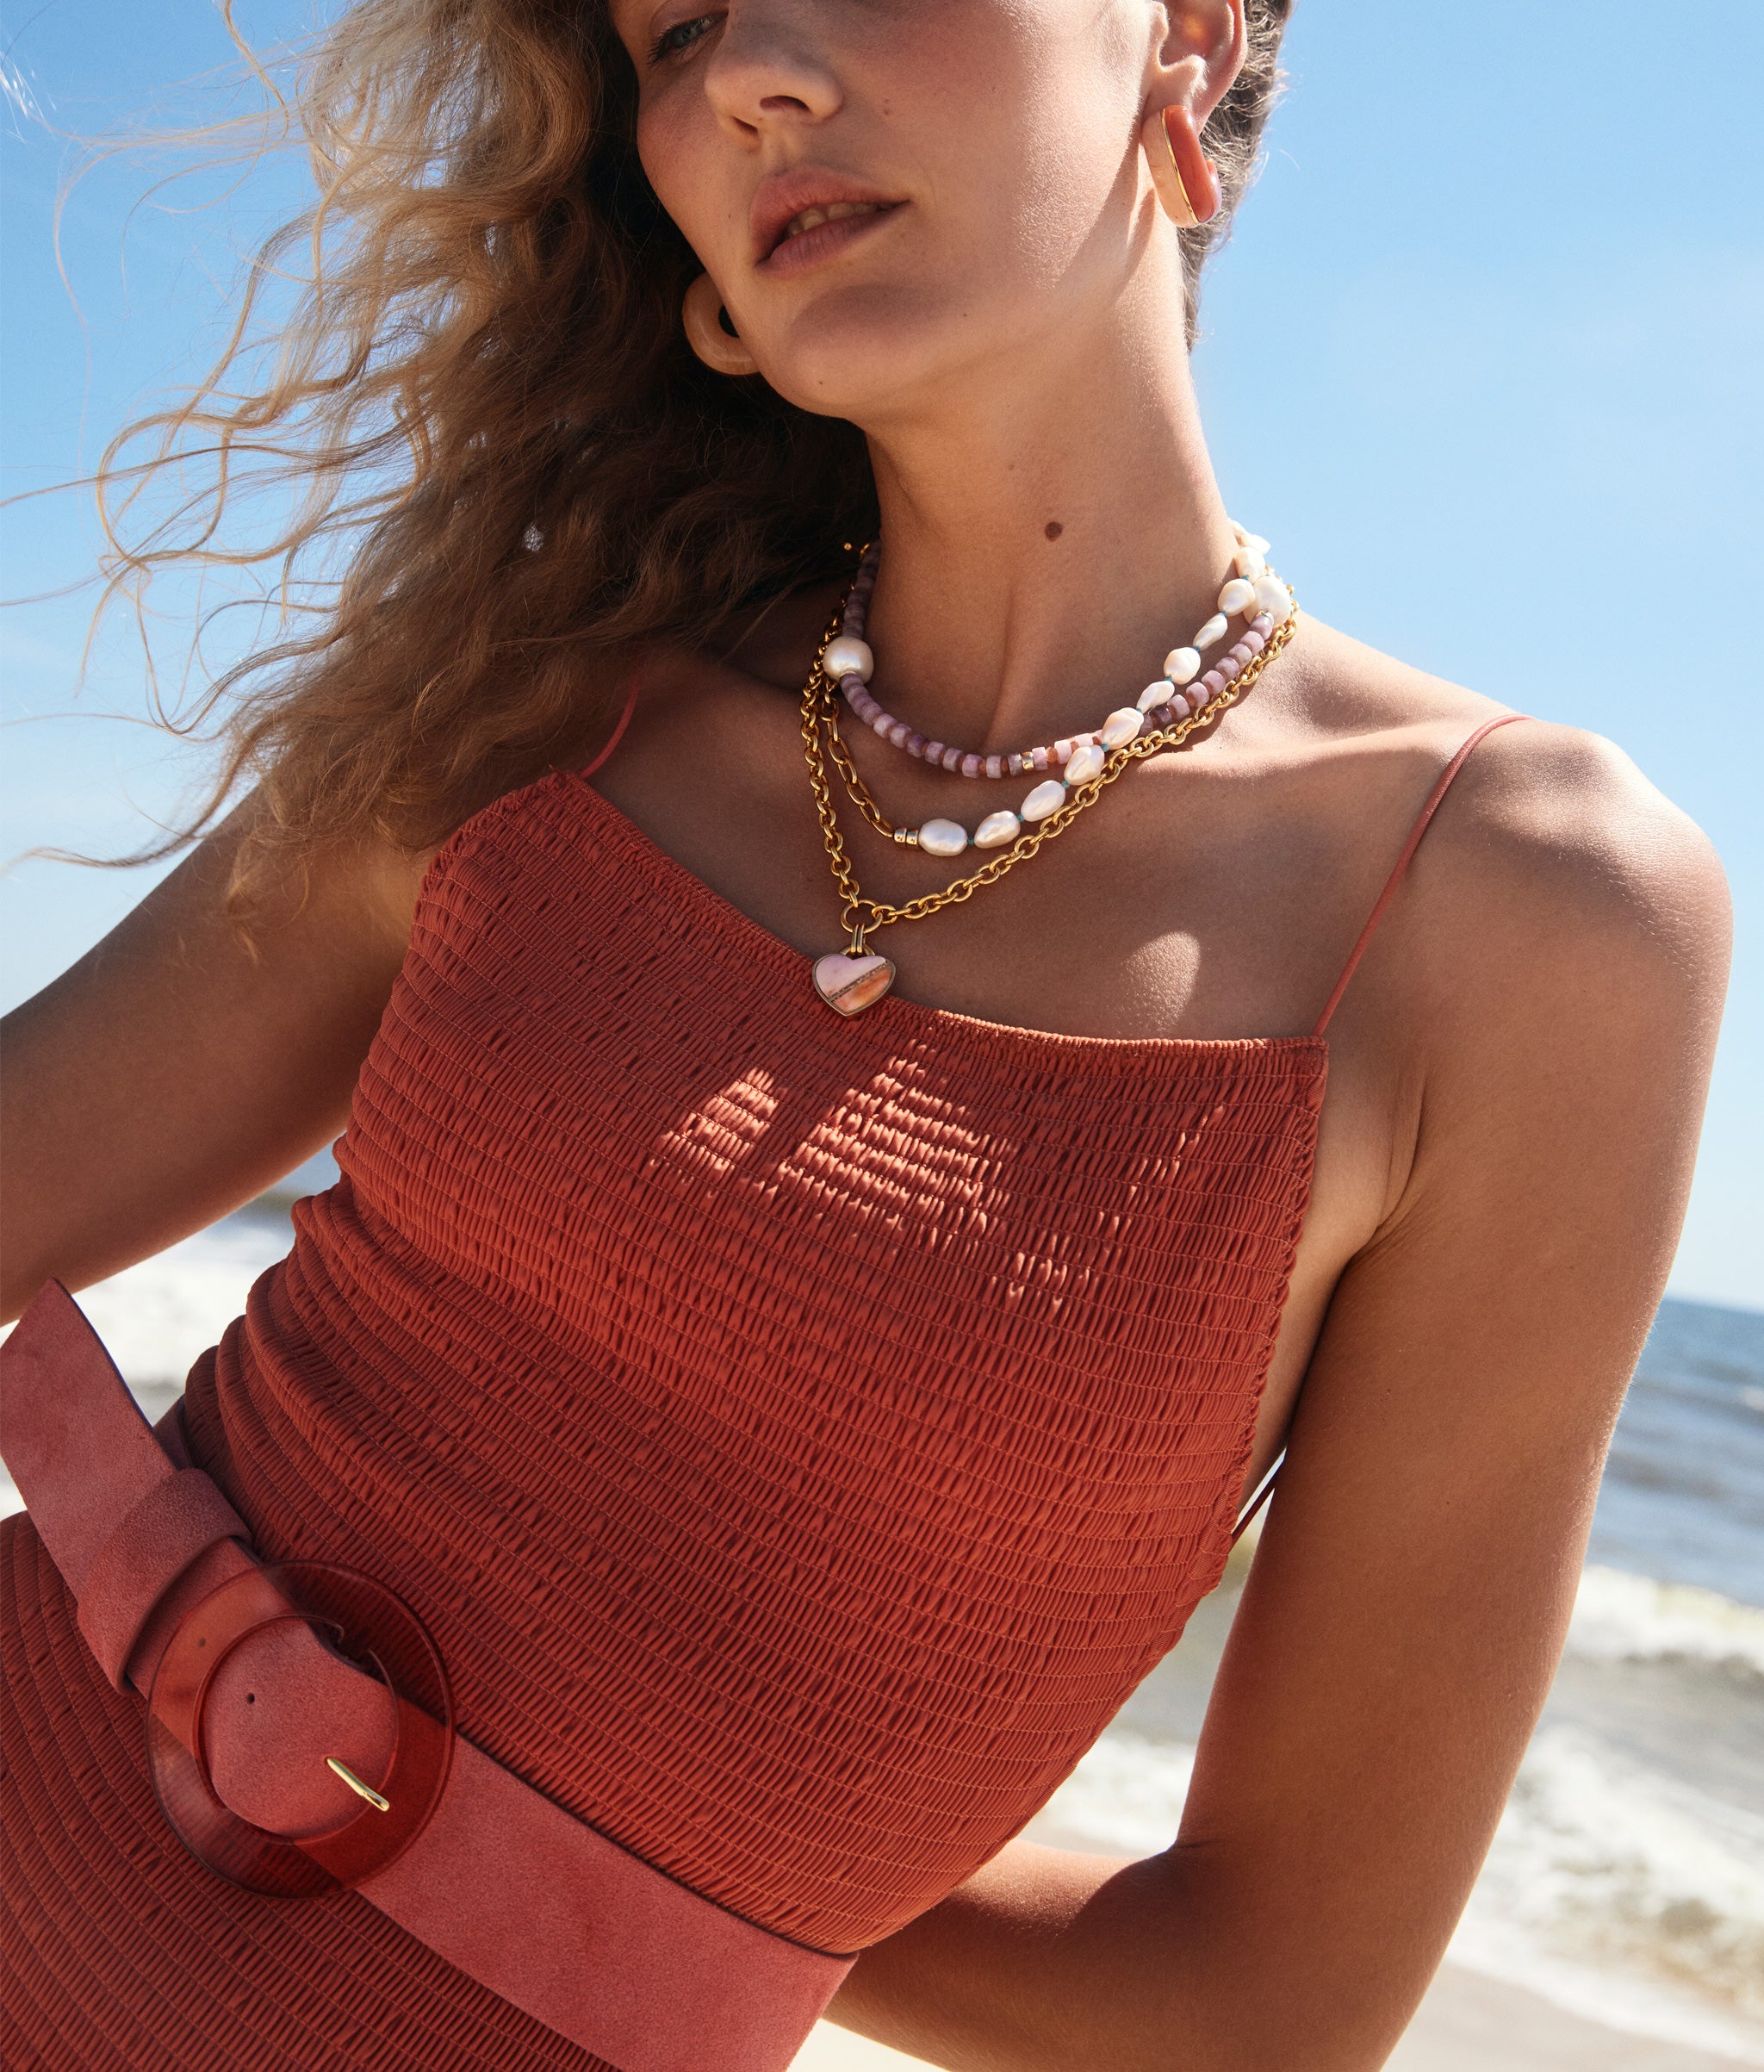 Model on beach wears coral-colored swimsuit with Atlantic Heart Necklace and other jewels.